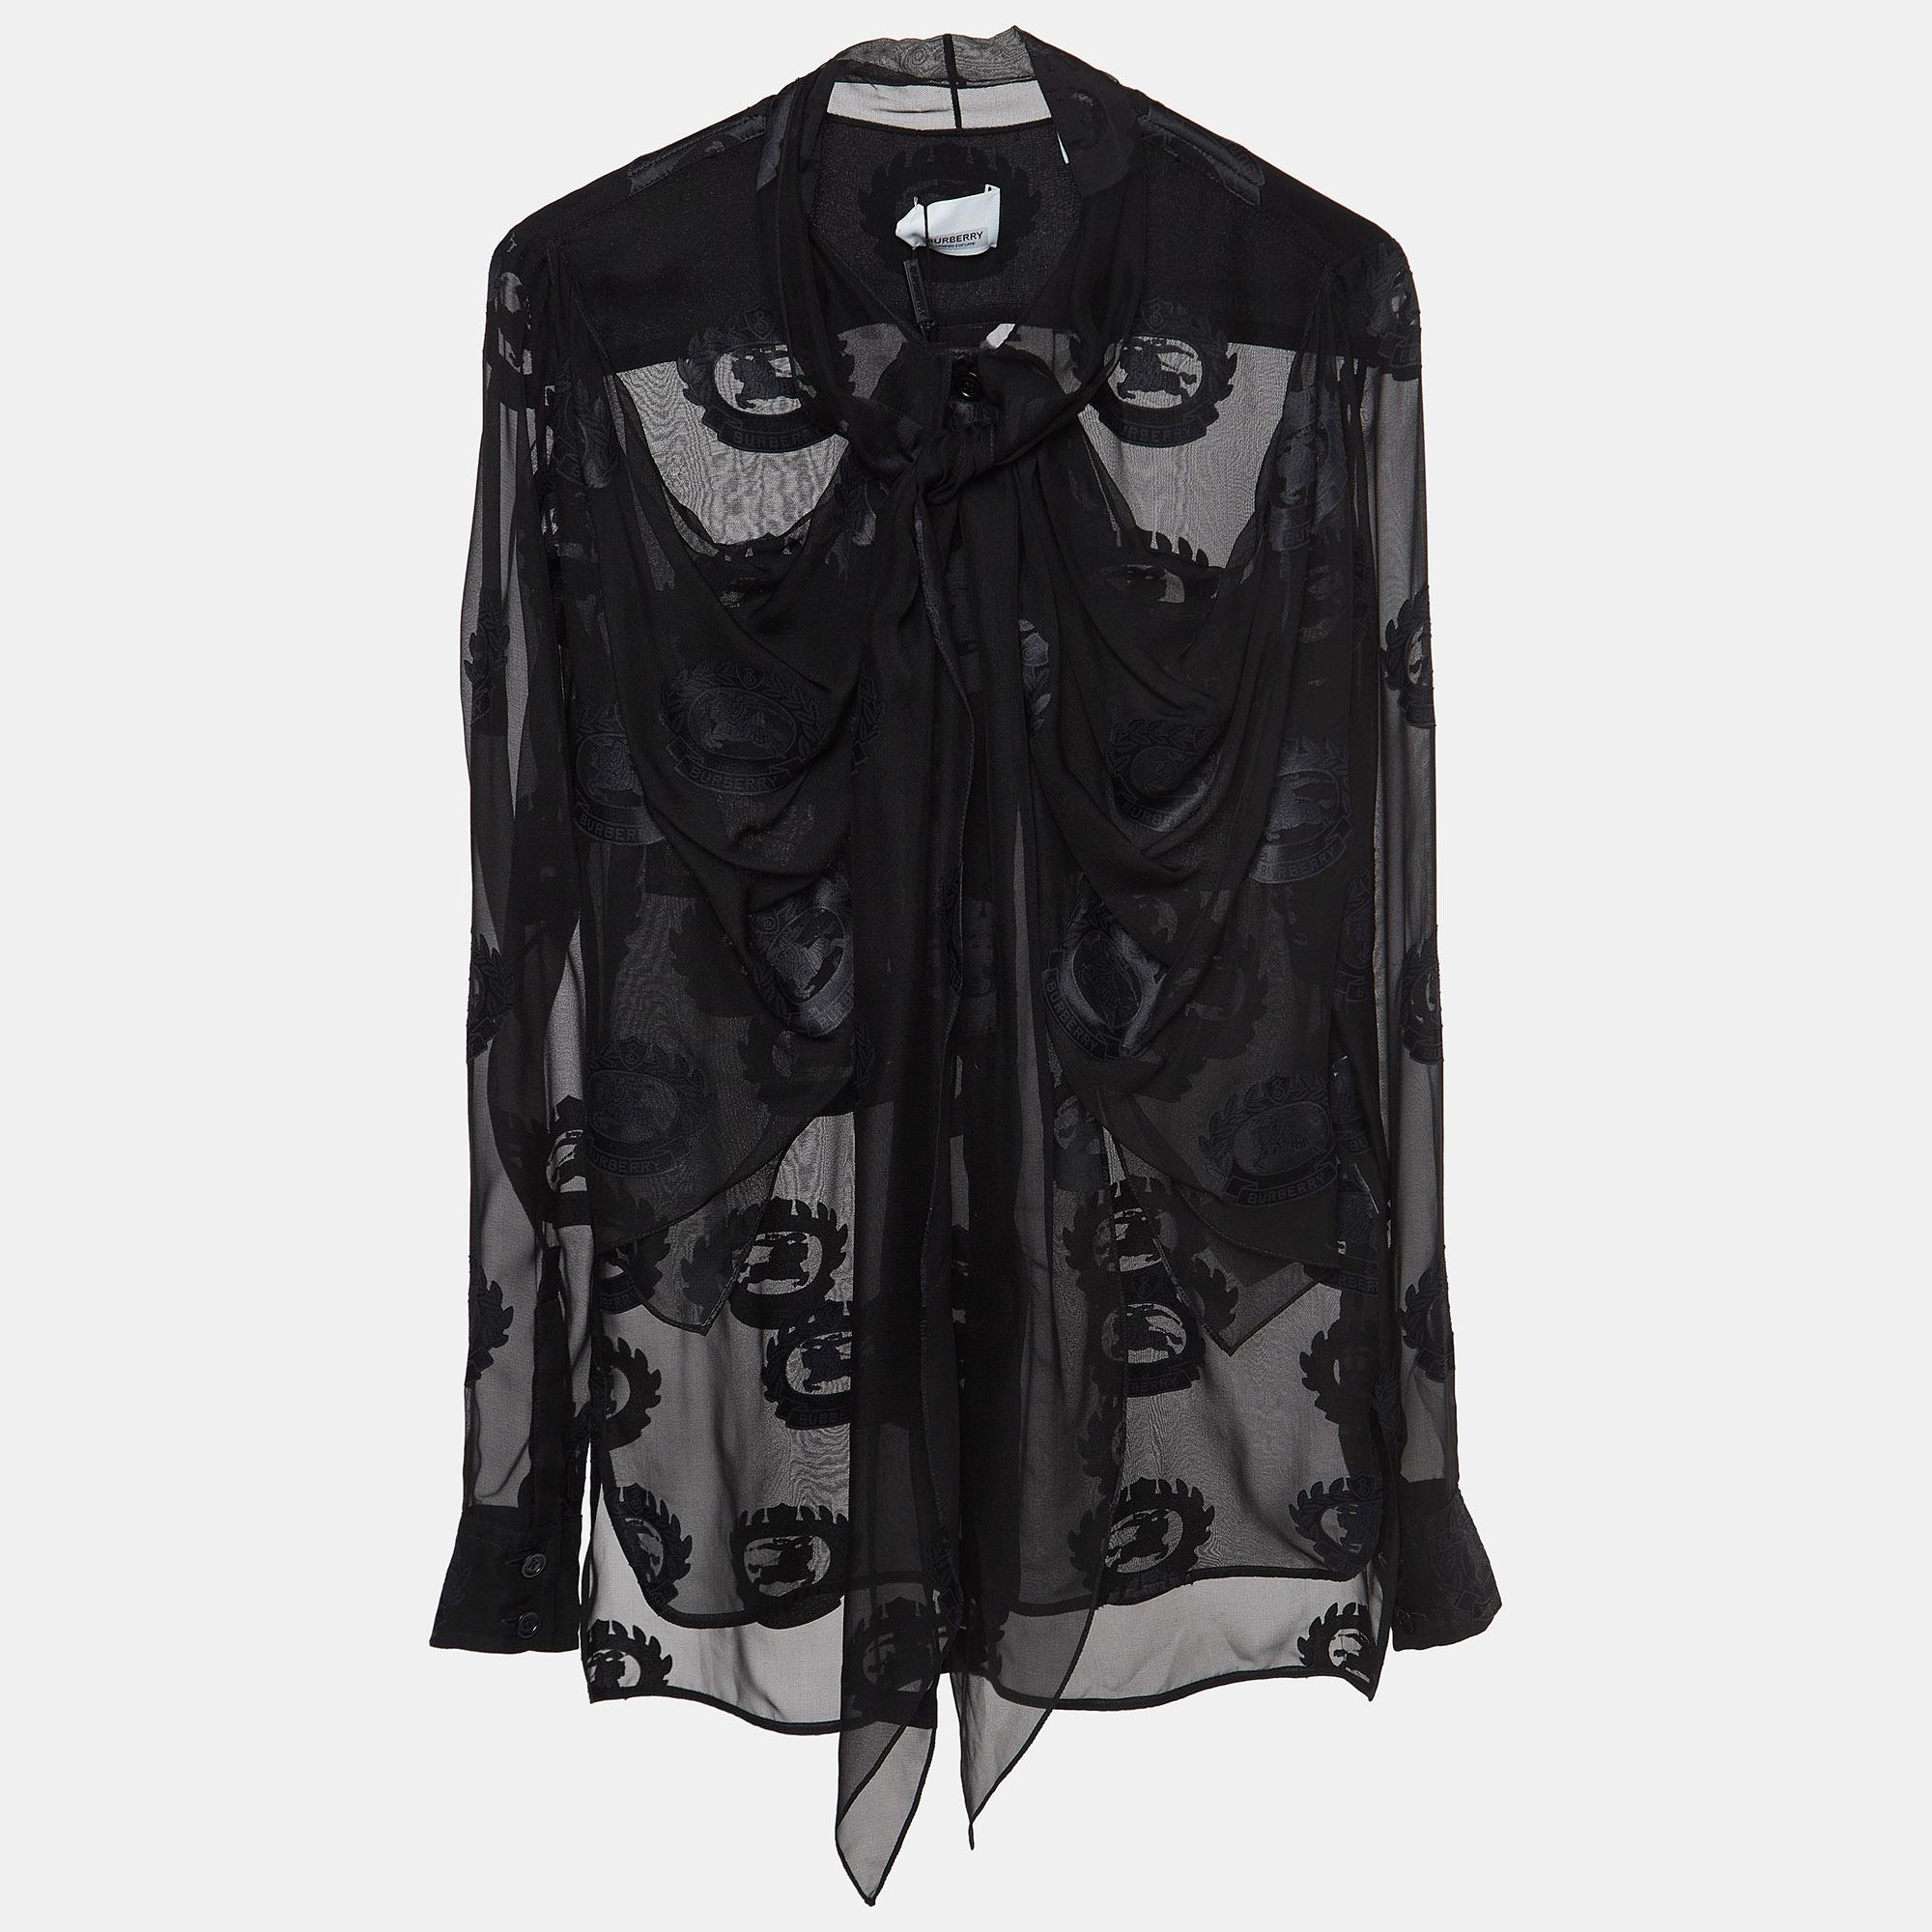 Crafted with precision, this Burberry sheer shirt blends luxury and functionality effortlessly. Team this fashion-forward essential with jeans to skirts and suits.

